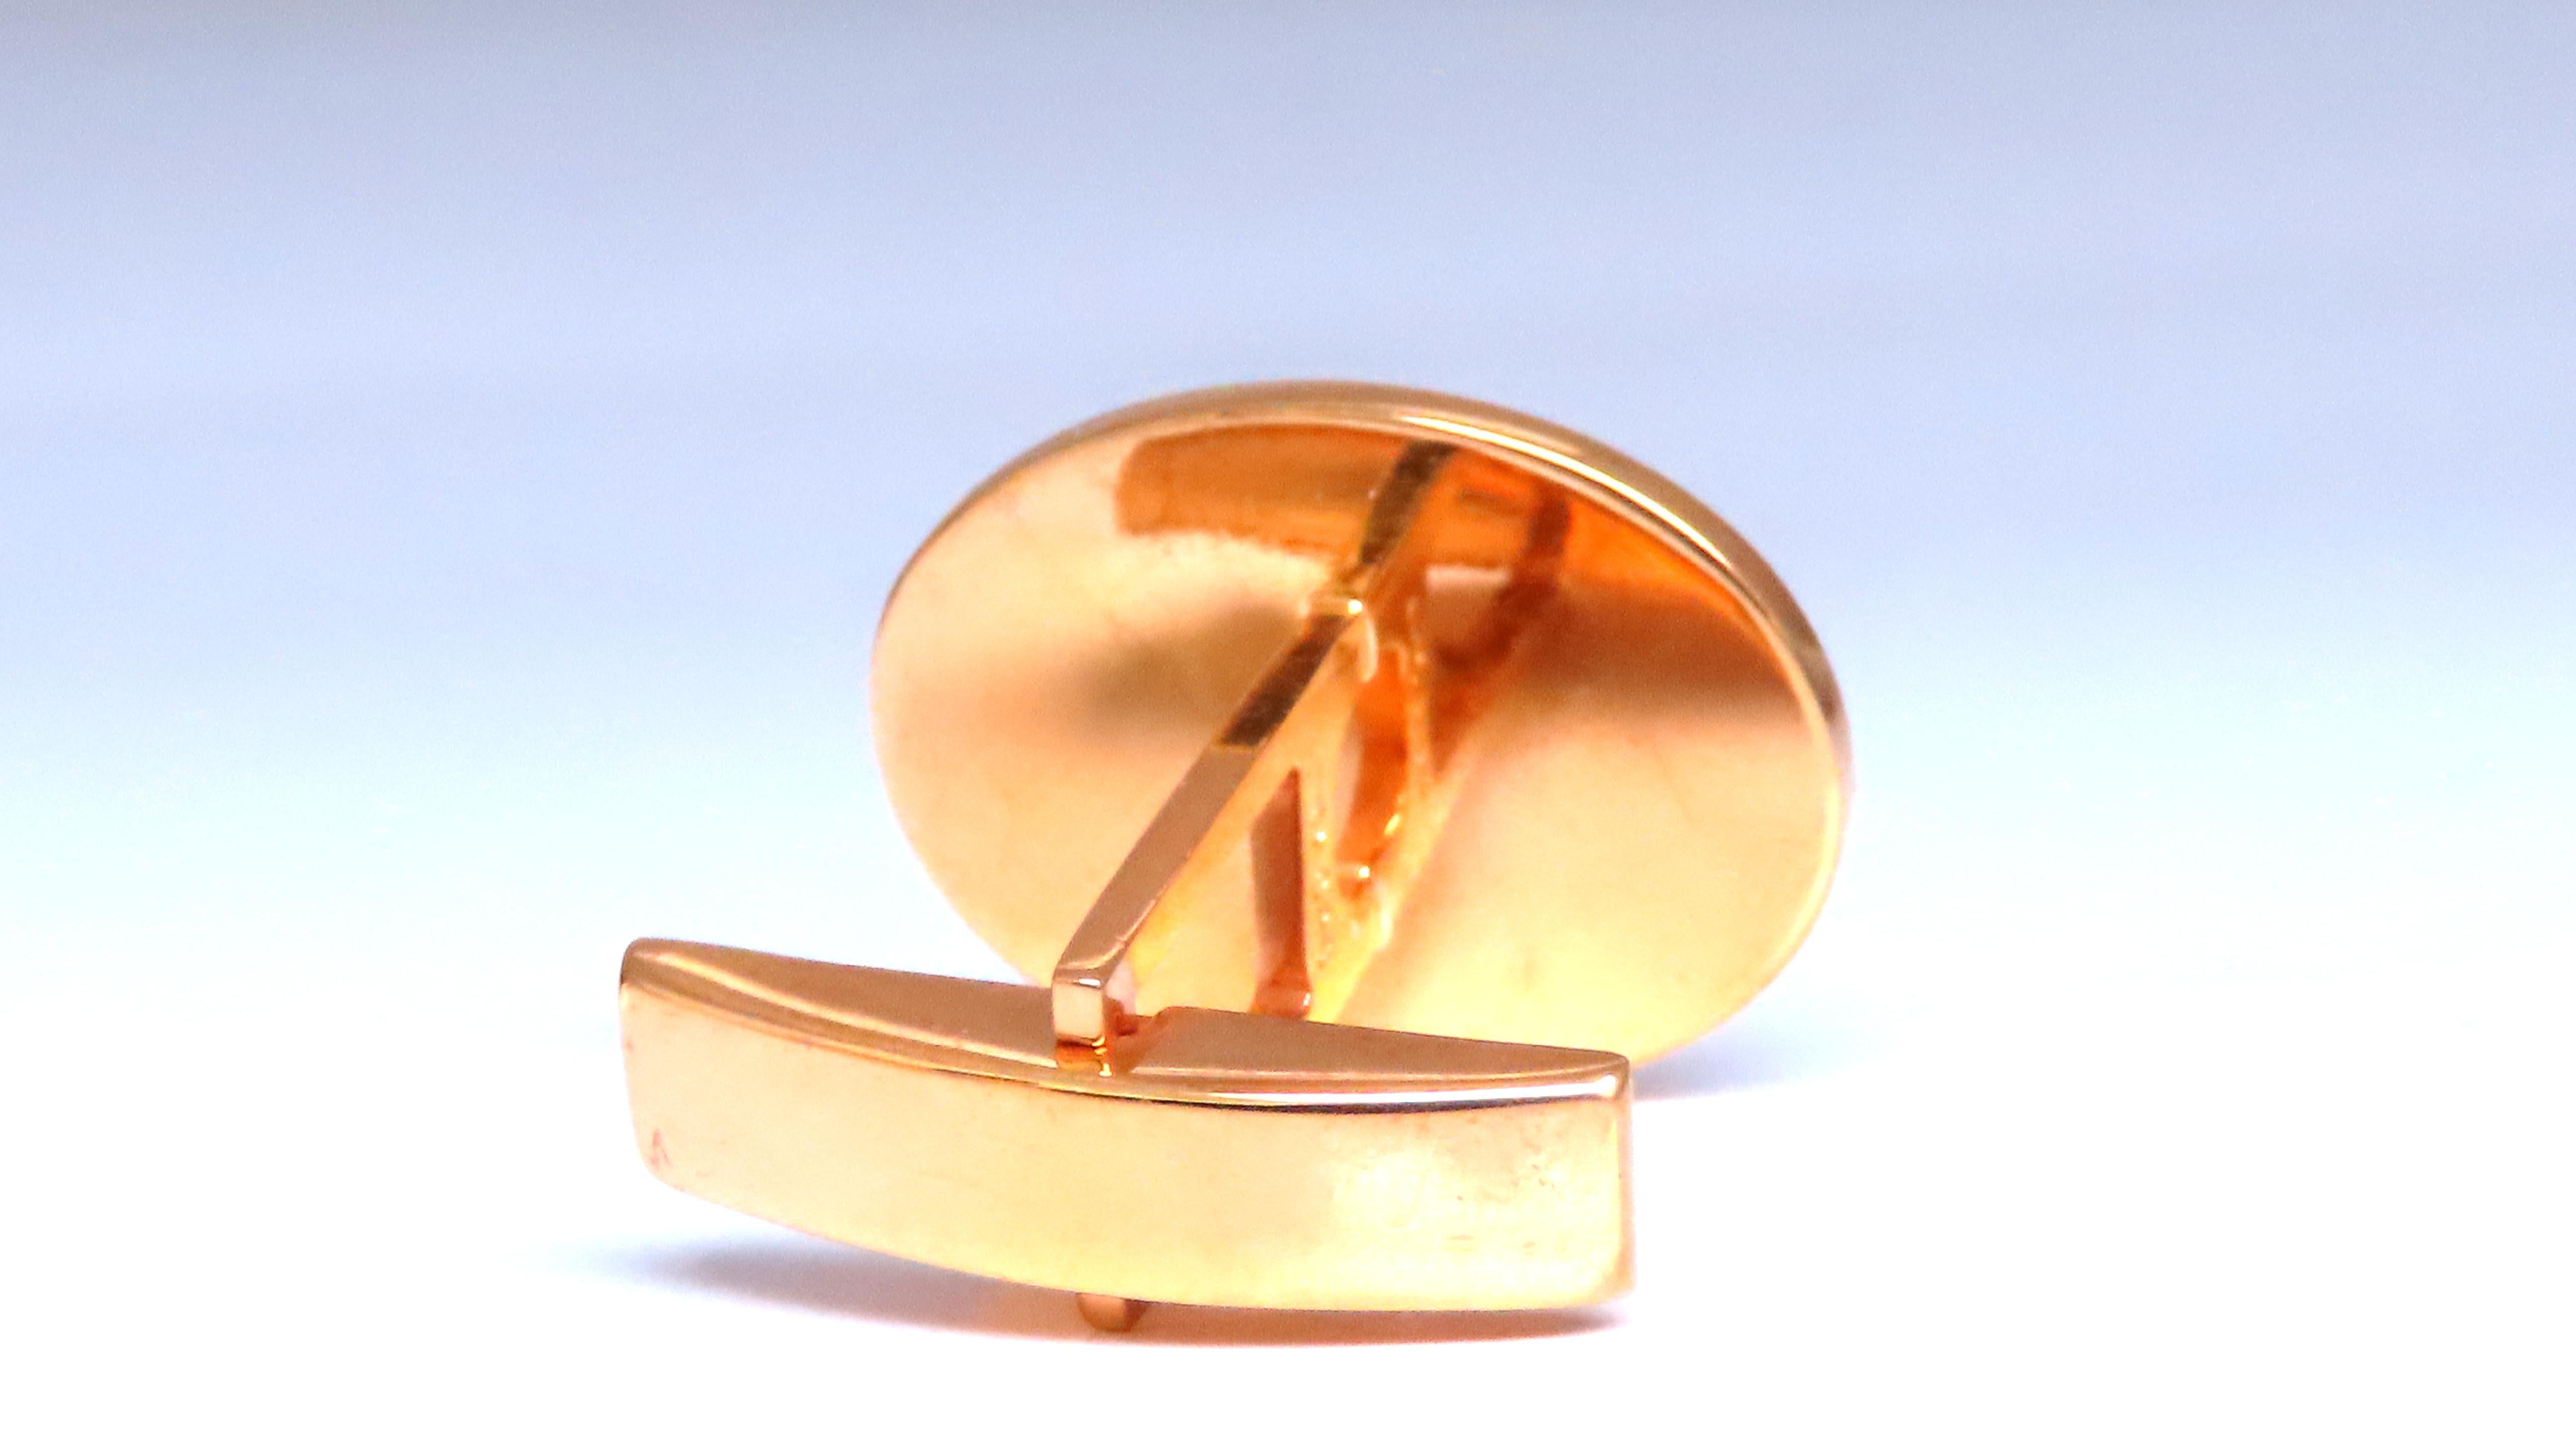 Sunburst Graver Etch Oval Cufflinks 14kt Gold 12367 In Excellent Condition For Sale In New York, NY